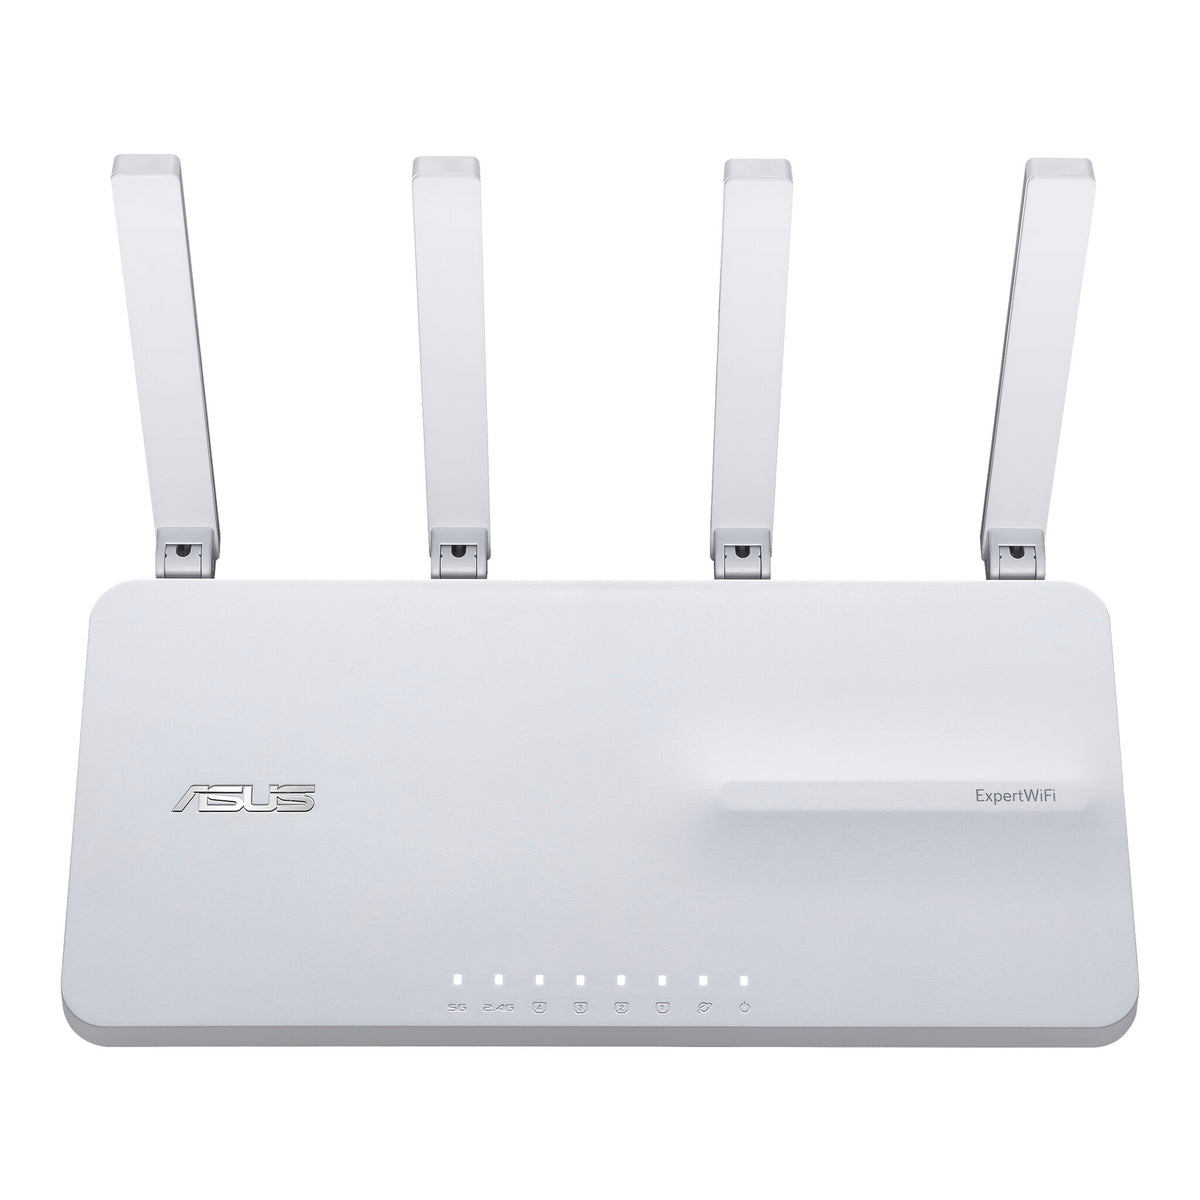 ASUS EBR63 Expert WiFi - Gigabit Ethernet Dual-band (2.4 GHz / 5 GHz)  wireless router in White